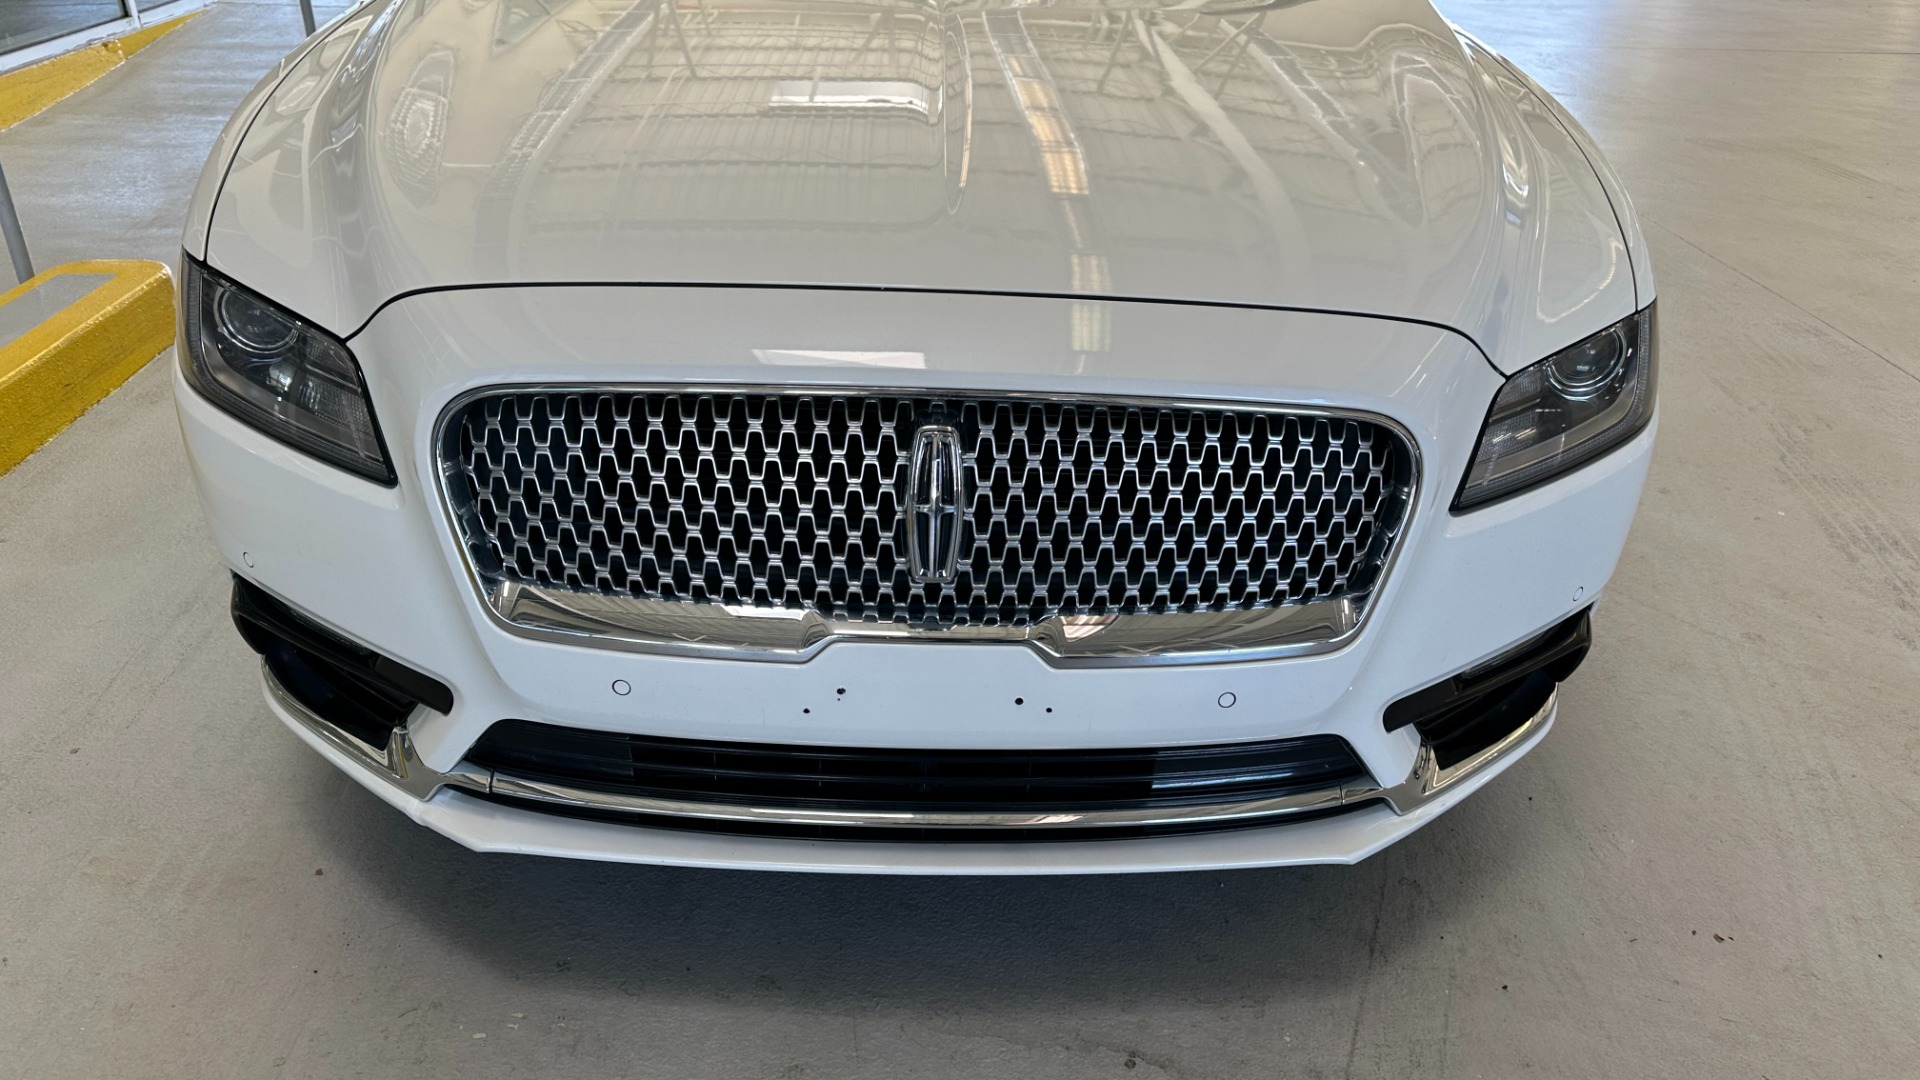 Used 2020 Lincoln Continental STANDARD / LEATHER / HEATED SEATS / BACKUP CAMERA / V6 ENGINE for sale $26,995 at Formula Imports in Charlotte NC 28227 9